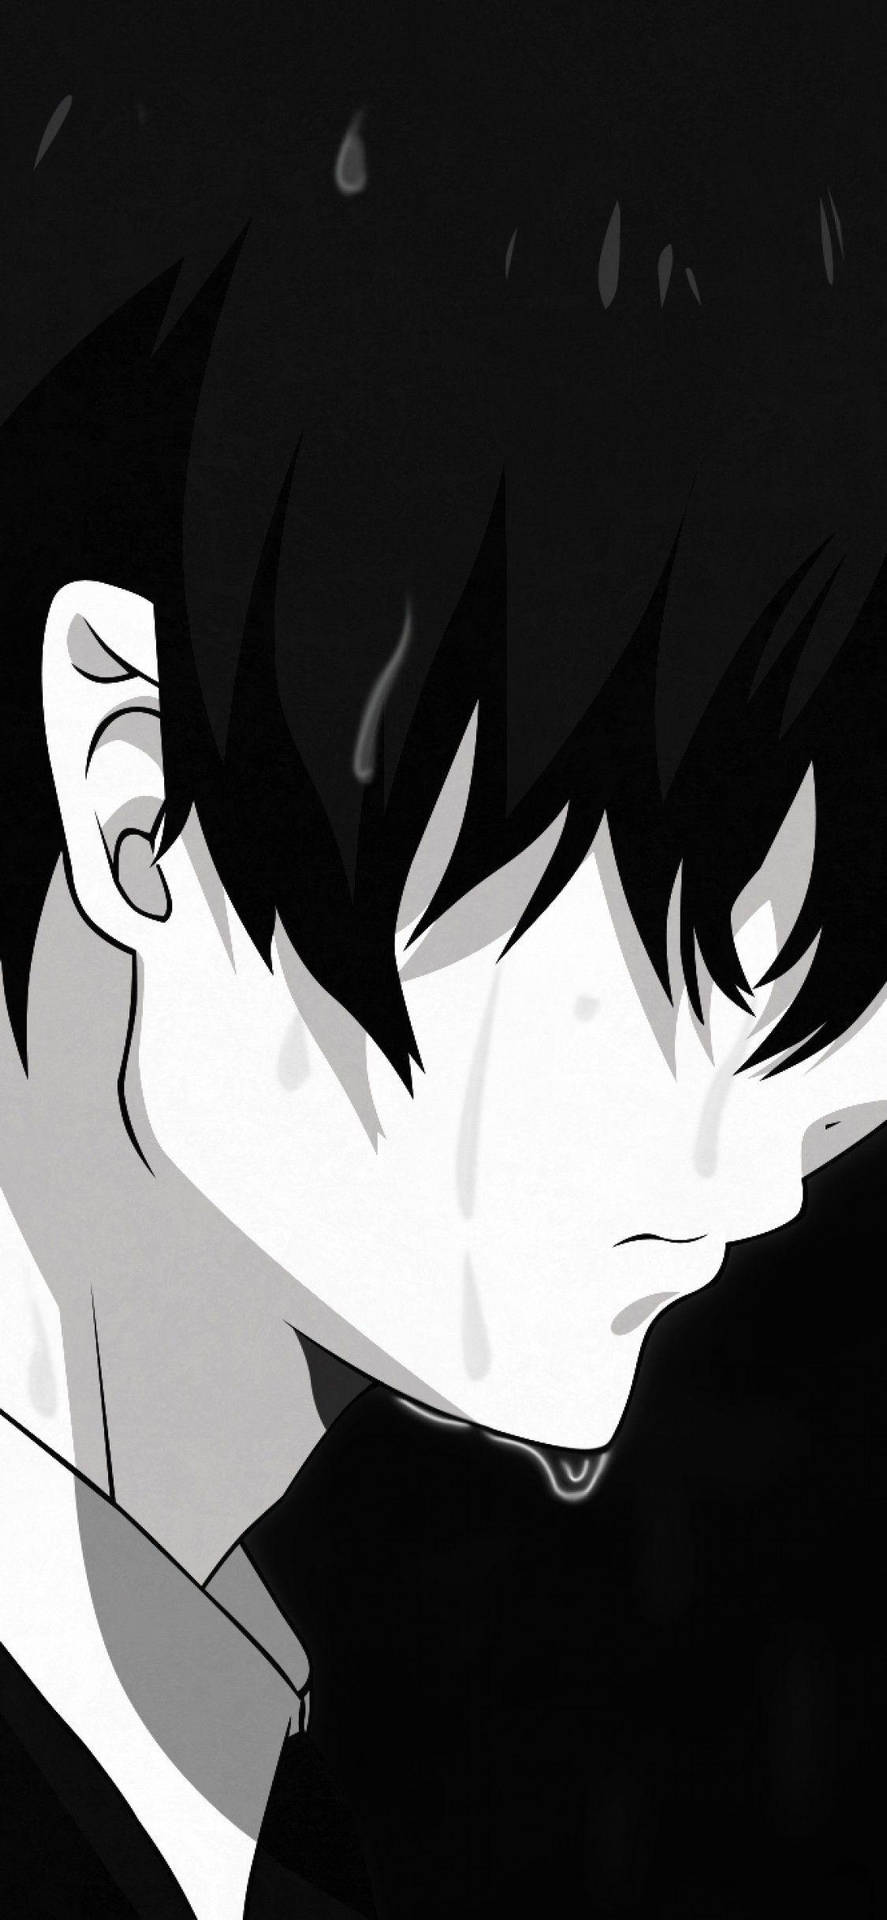 Mysterious Black and White Anime Boy Wallpaper